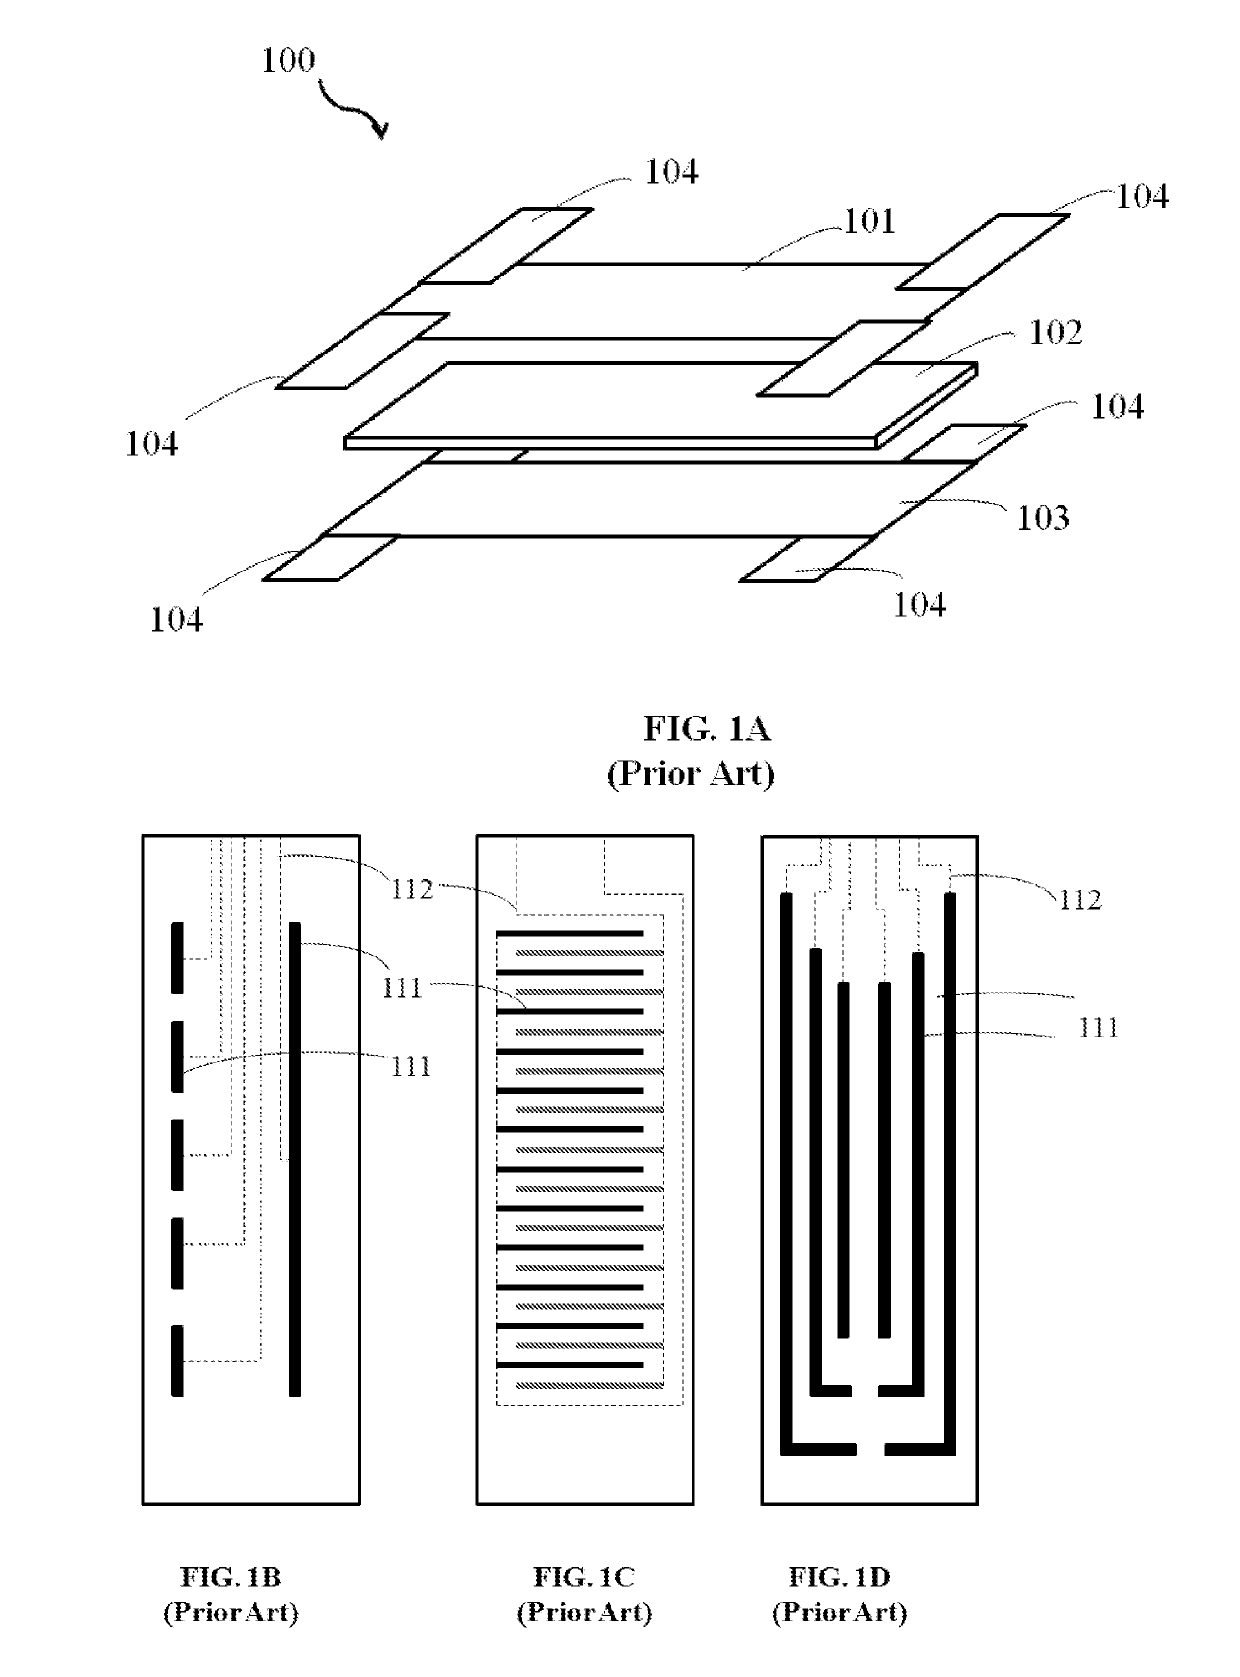 Method of manufacturing a diaper with moisture sensors